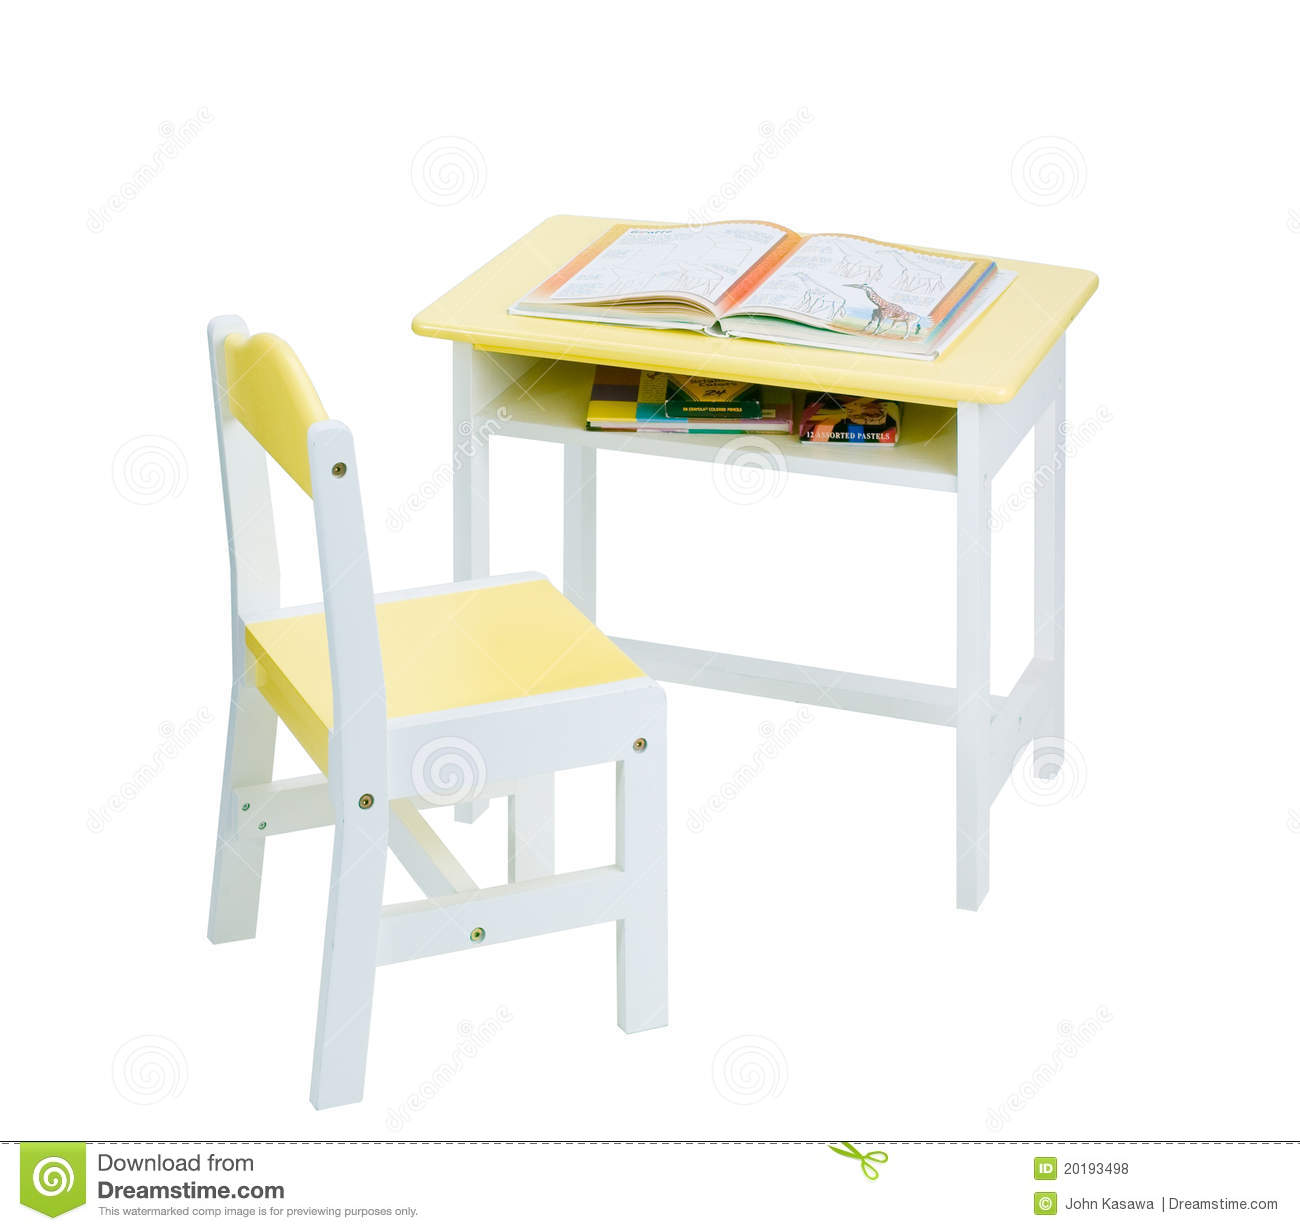 Toy Table And Chair In One Set For Kids Or Children In The School Or